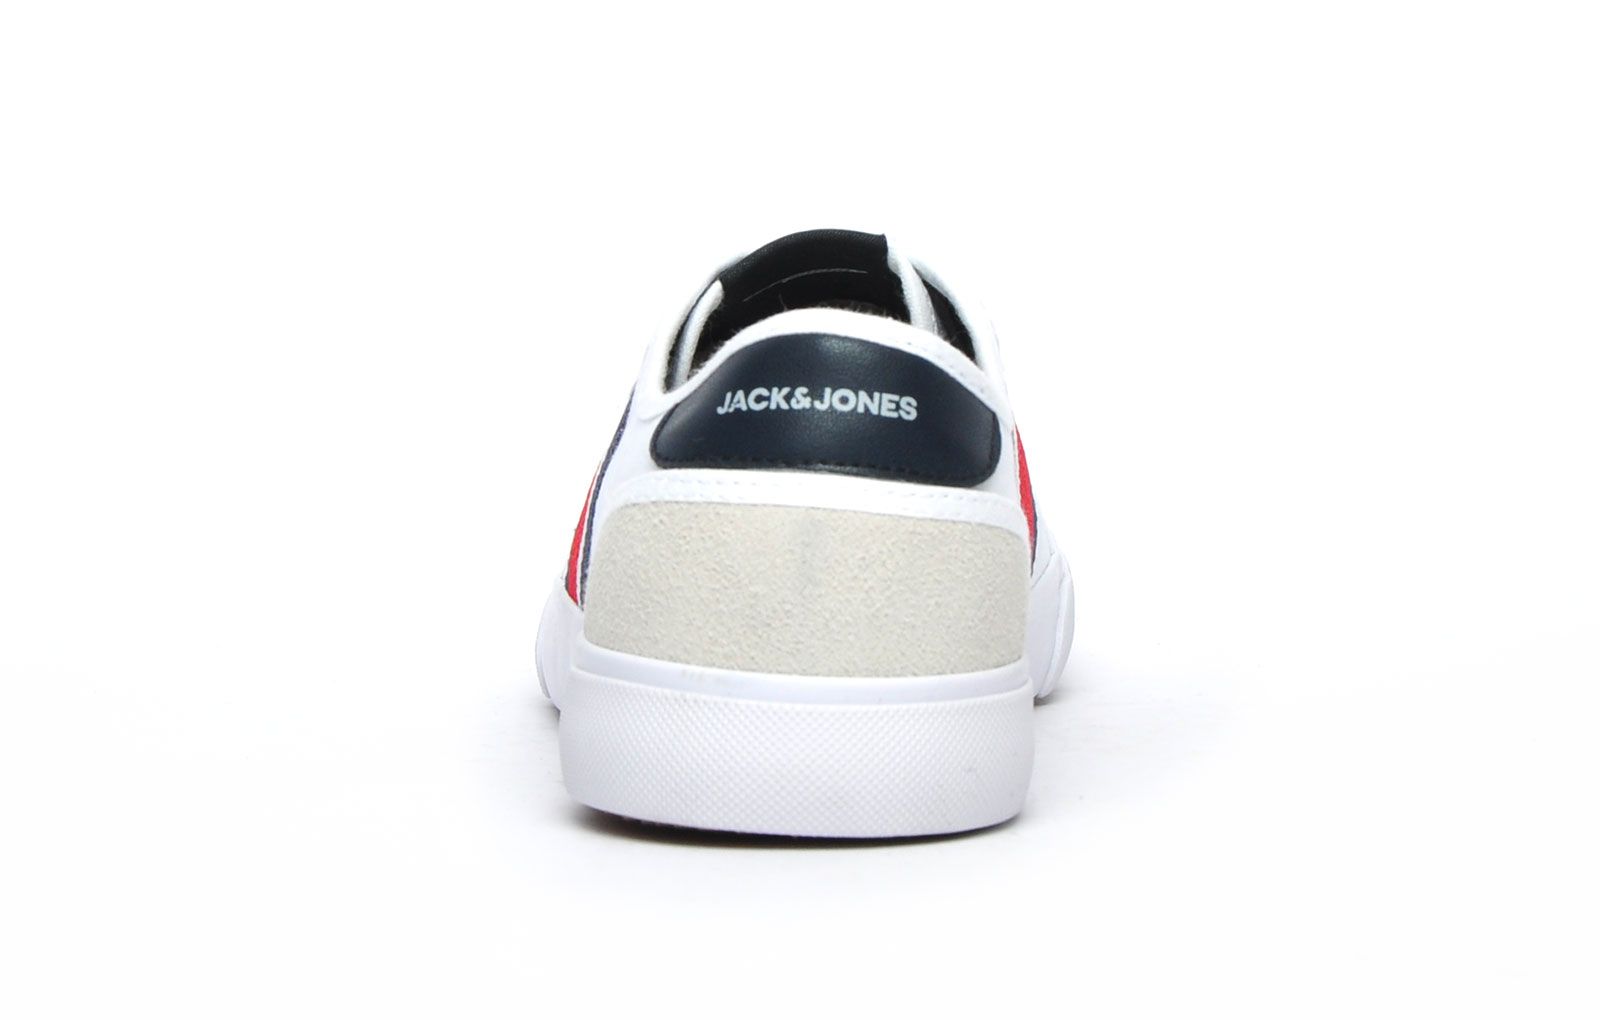 The Jack & Jones Logan hits the market with a statement design of the classic plimsol, constructed in a white canvas textile upper with high end designer details throughout finished with a textured rubber sole to make a bold statement.
 This stylish design is completed with Jack & Jones branding to the tongue and heel giving a fashion forward style with lots of street appeal.
 - Canvas textile uppers
 - Soft padded insole
 - Durable rubber outsole
 - Classic Lace up fastening
 - Jack & Jones branding throughout